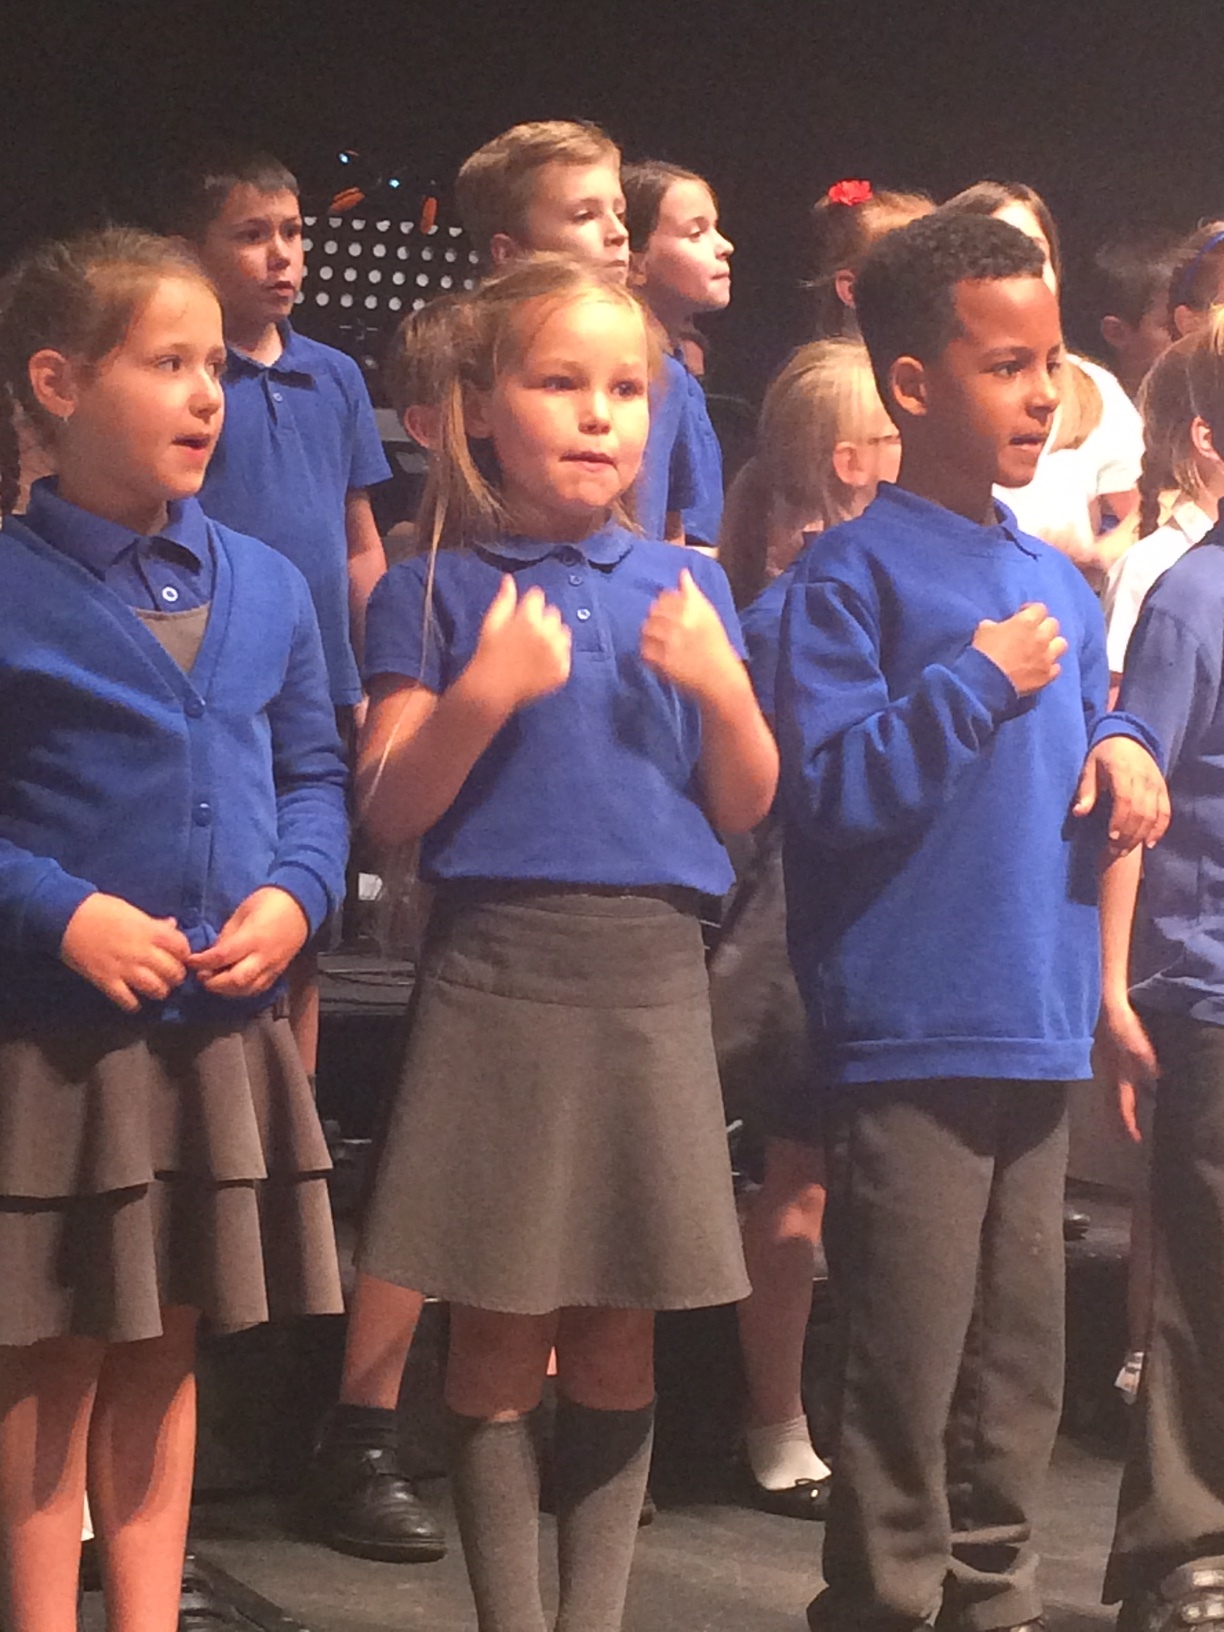 The Sing Out Play Out Celebration concerts were a huge success with 40 schools taking part